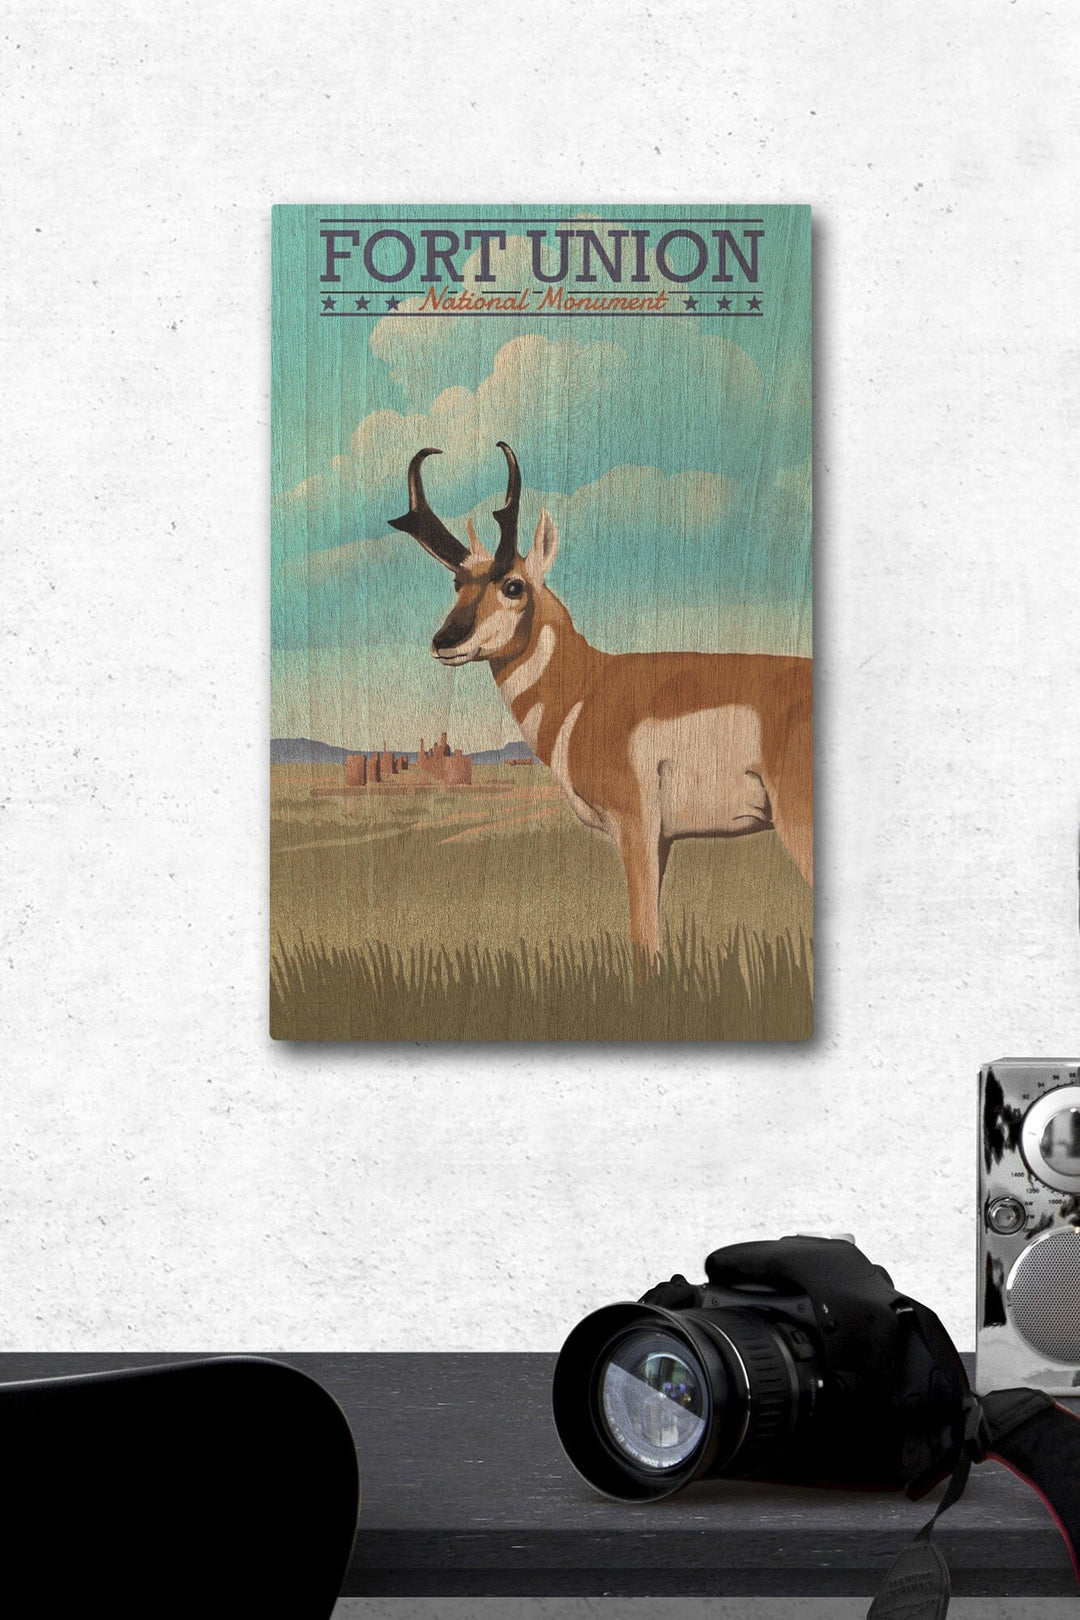 Fort Union, New Mexico, Pronghorn Antelope, Lithograph, Lantern Press Artwork, Wood Signs and Postcards Wood Lantern Press 12 x 18 Wood Gallery Print 